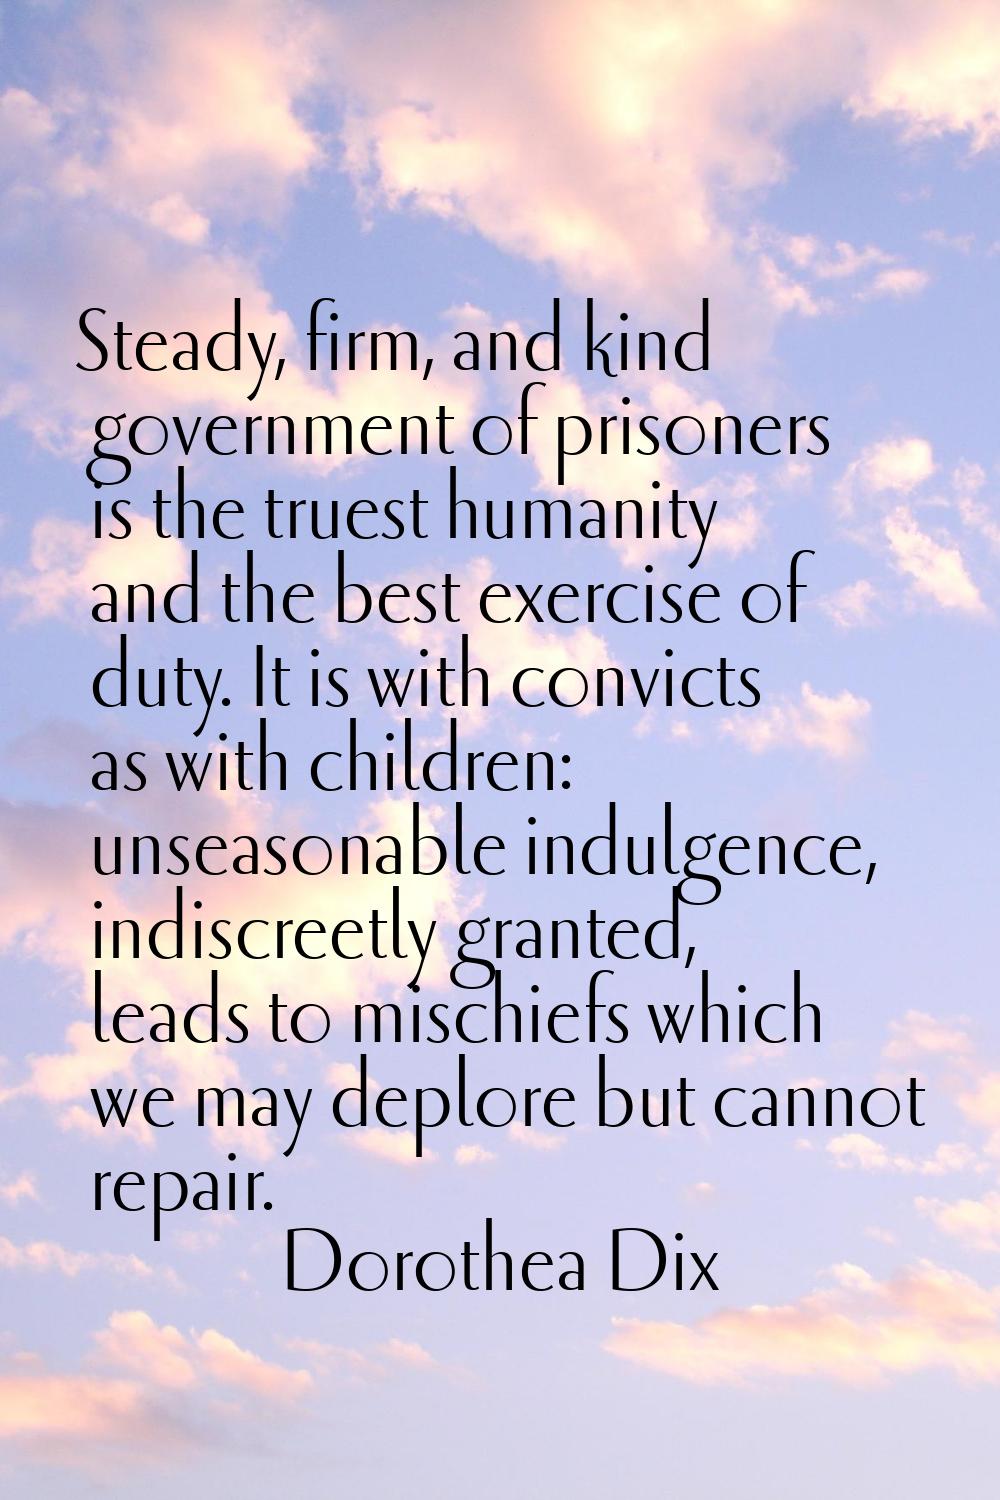 Steady, firm, and kind government of prisoners is the truest humanity and the best exercise of duty